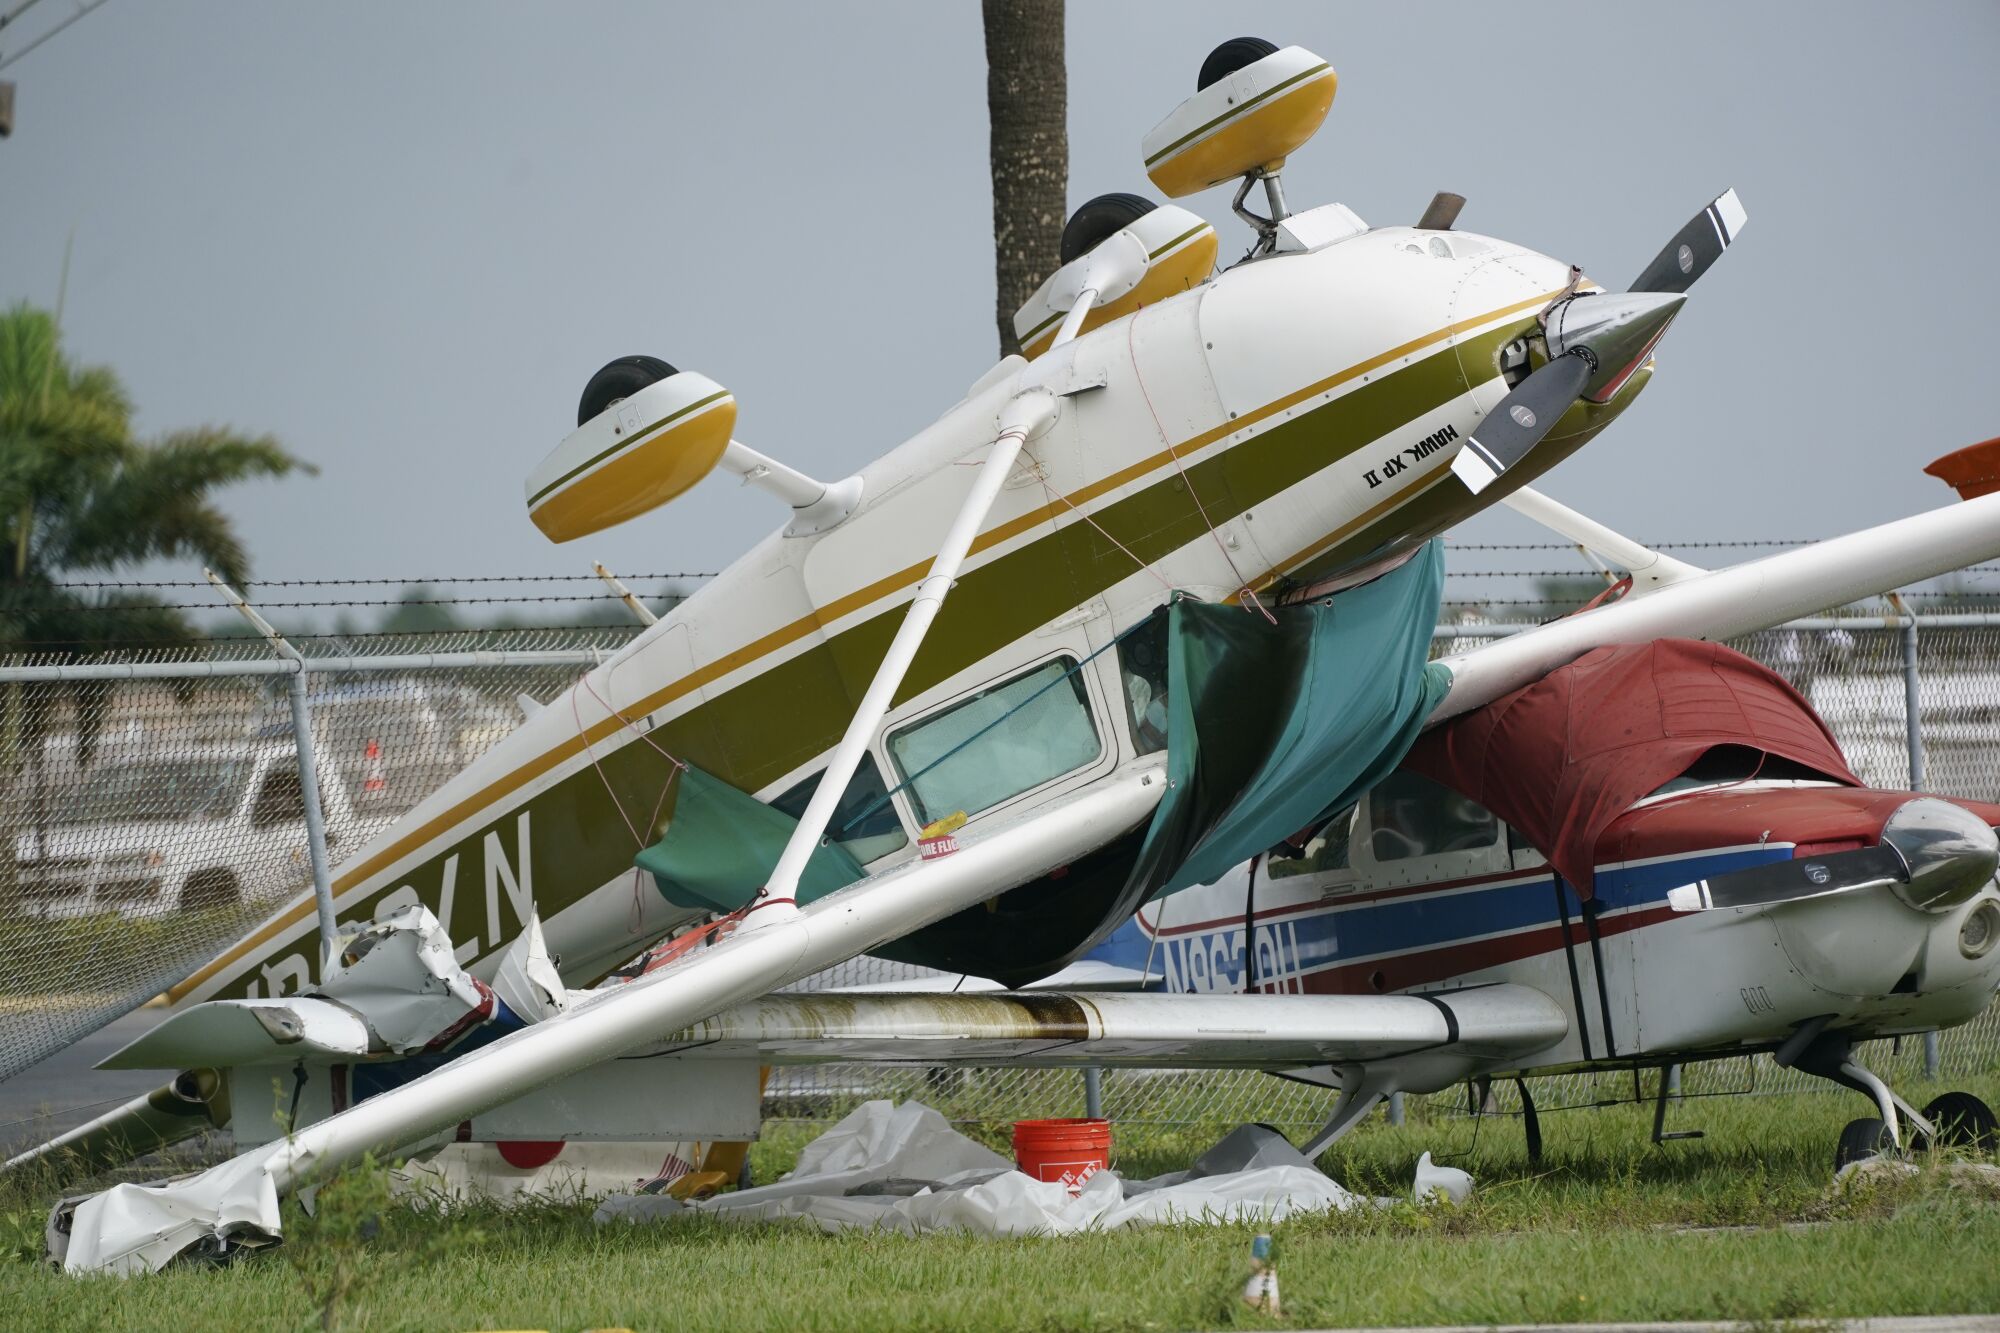 An overturned airplane in Hurricane Ian's aftermath